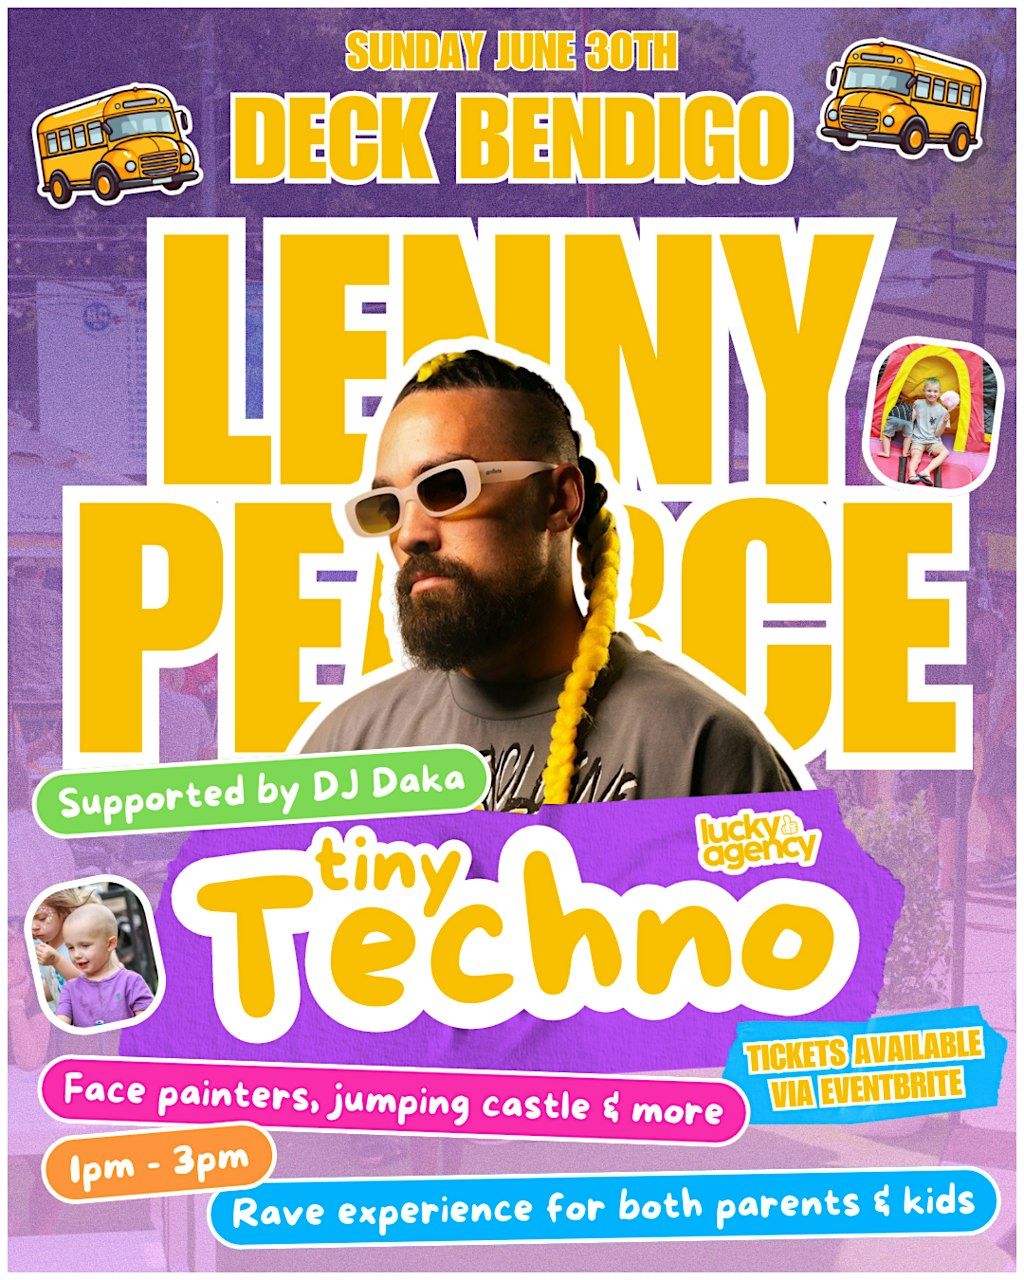 TINY TECHNO KIDS PARTY FT. LENNY PEARCE (DJ for The Wiggles Sound System)